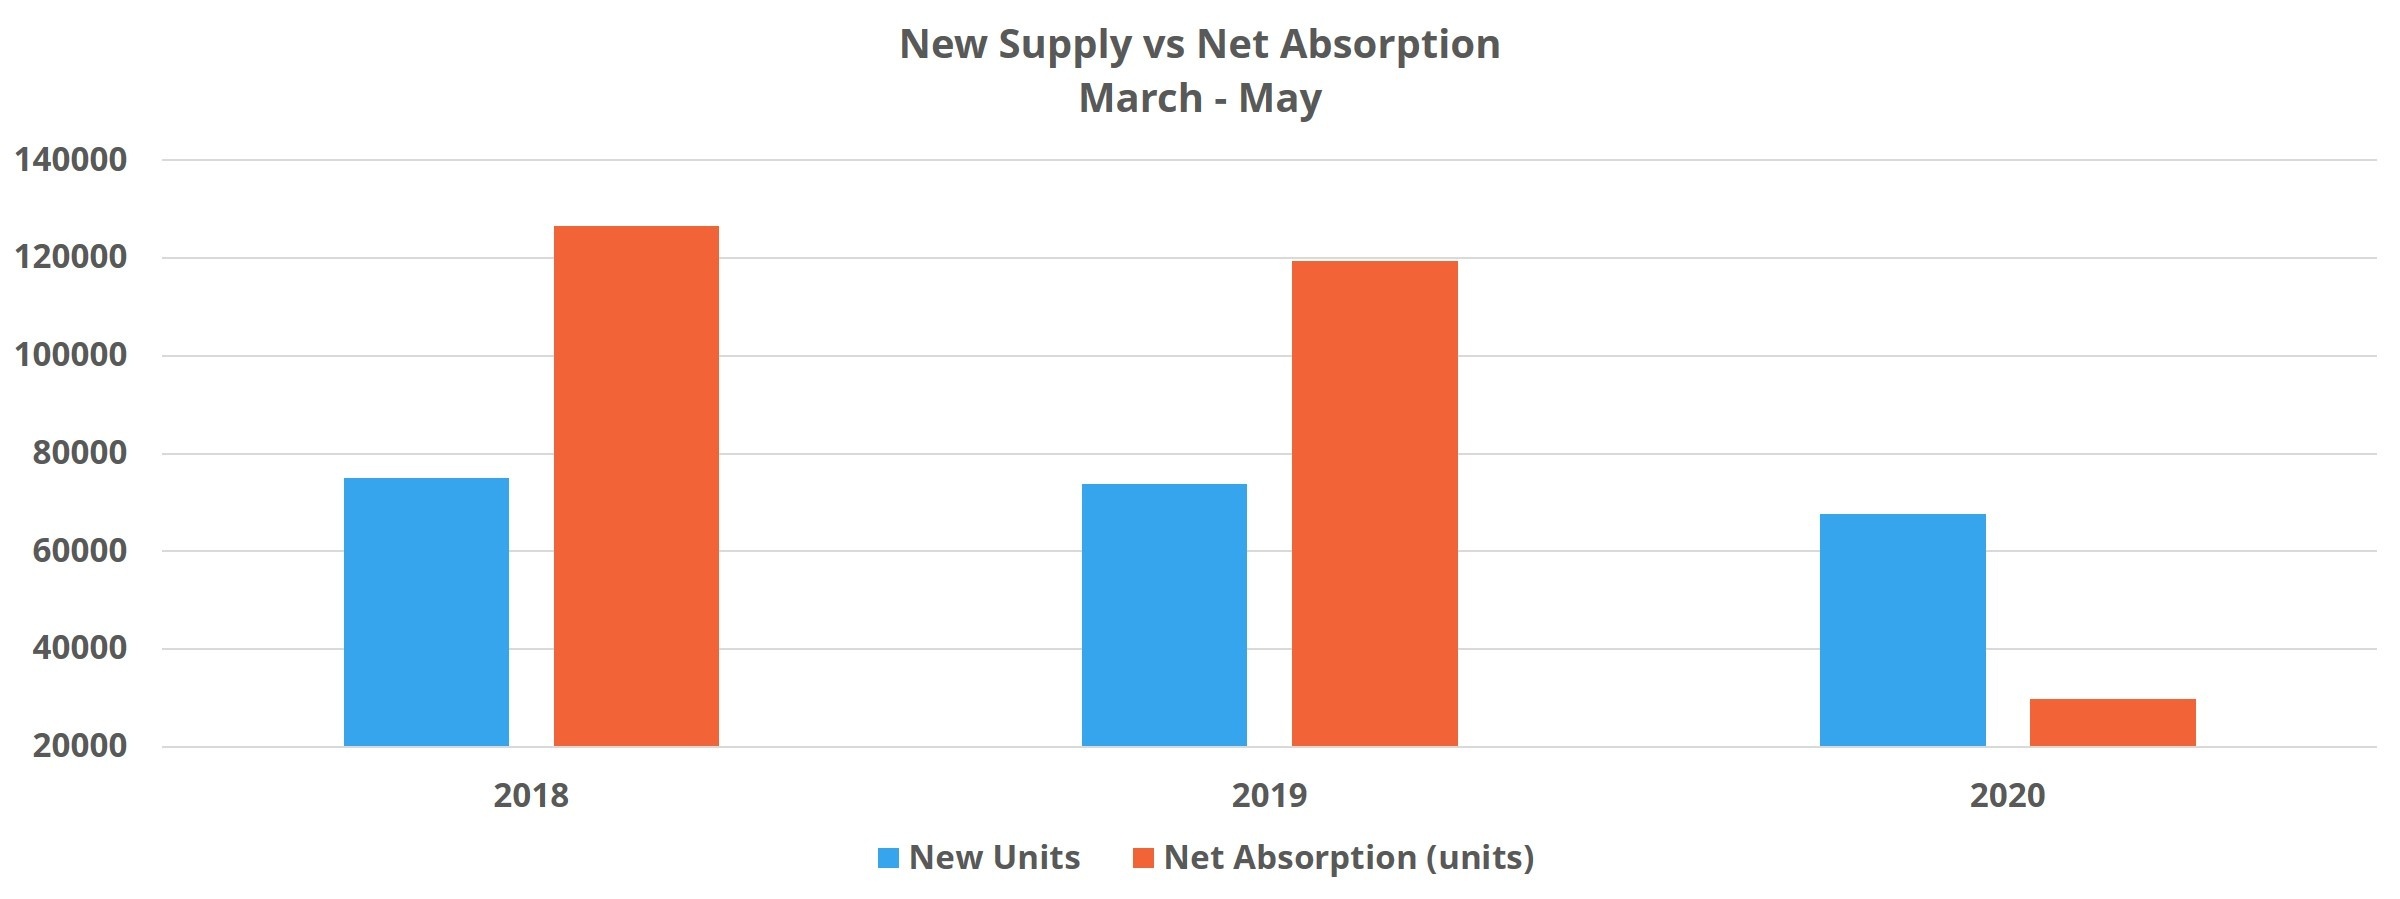 New Supply vs Net Absorption March - May